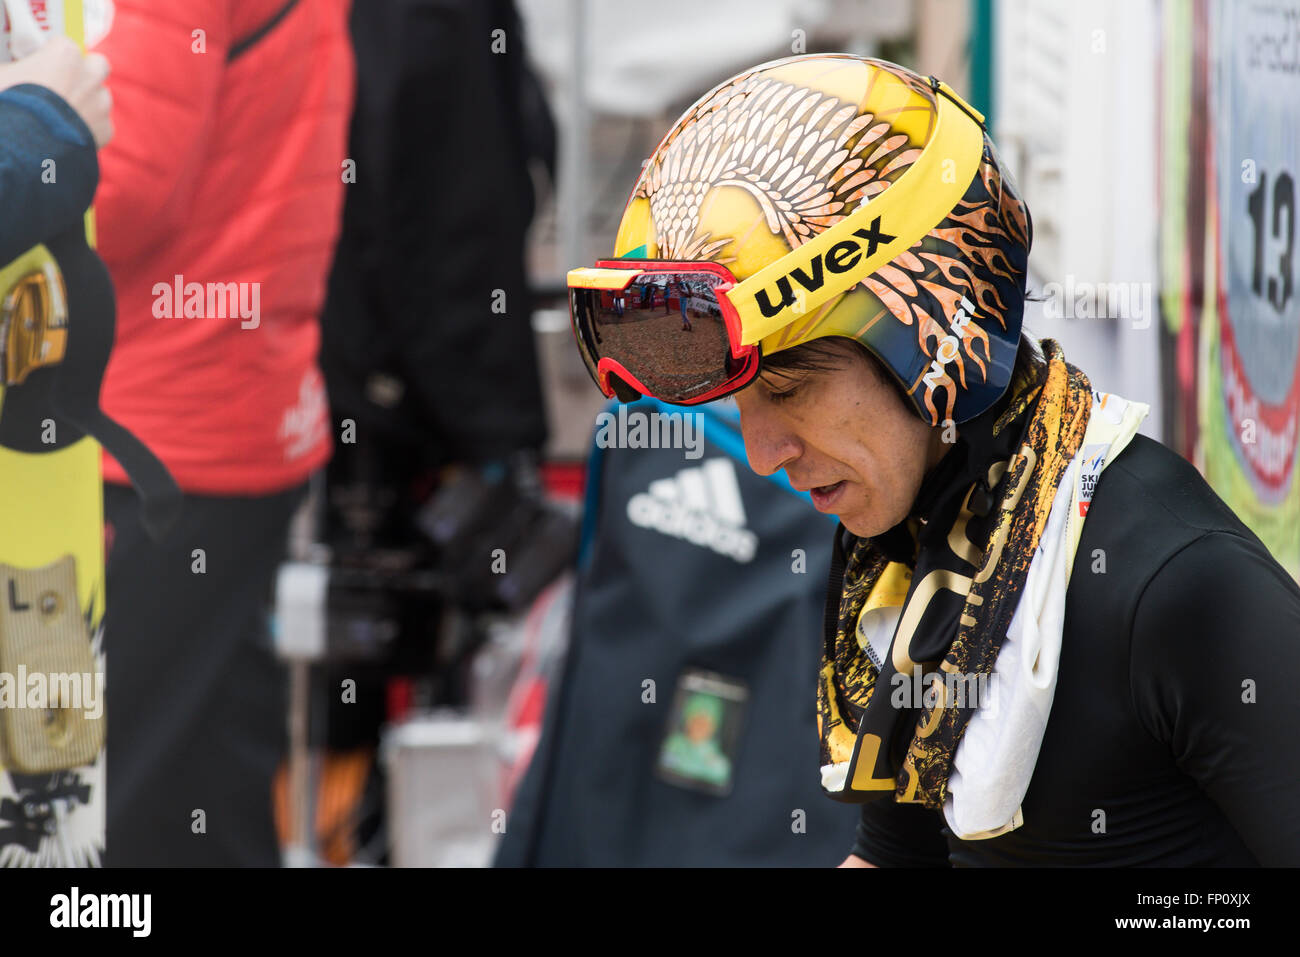 Planica, Slovenia. 17th Mar, 2016. Noriaki Kasai of Japan competes for 500 time on a World Cup competition during Planica FIS Ski Jumping World Cup final on the March 17, 2016 in Planica, Slovenia. © Rok Rakun/Pacific Press/Alamy Live News Stock Photo